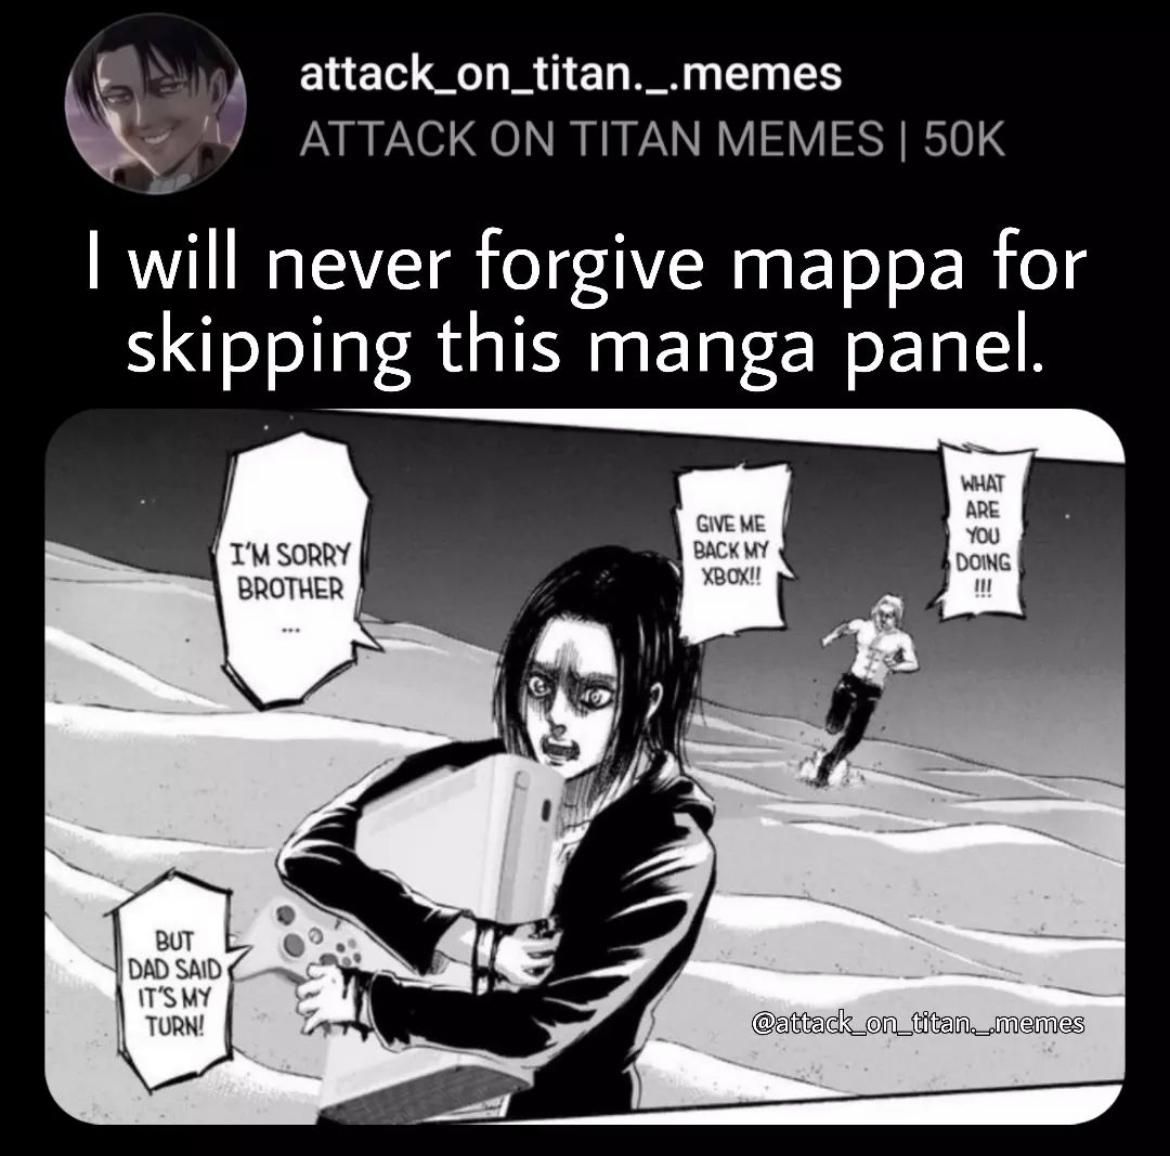 People getting way too comfortable with AoT memes.